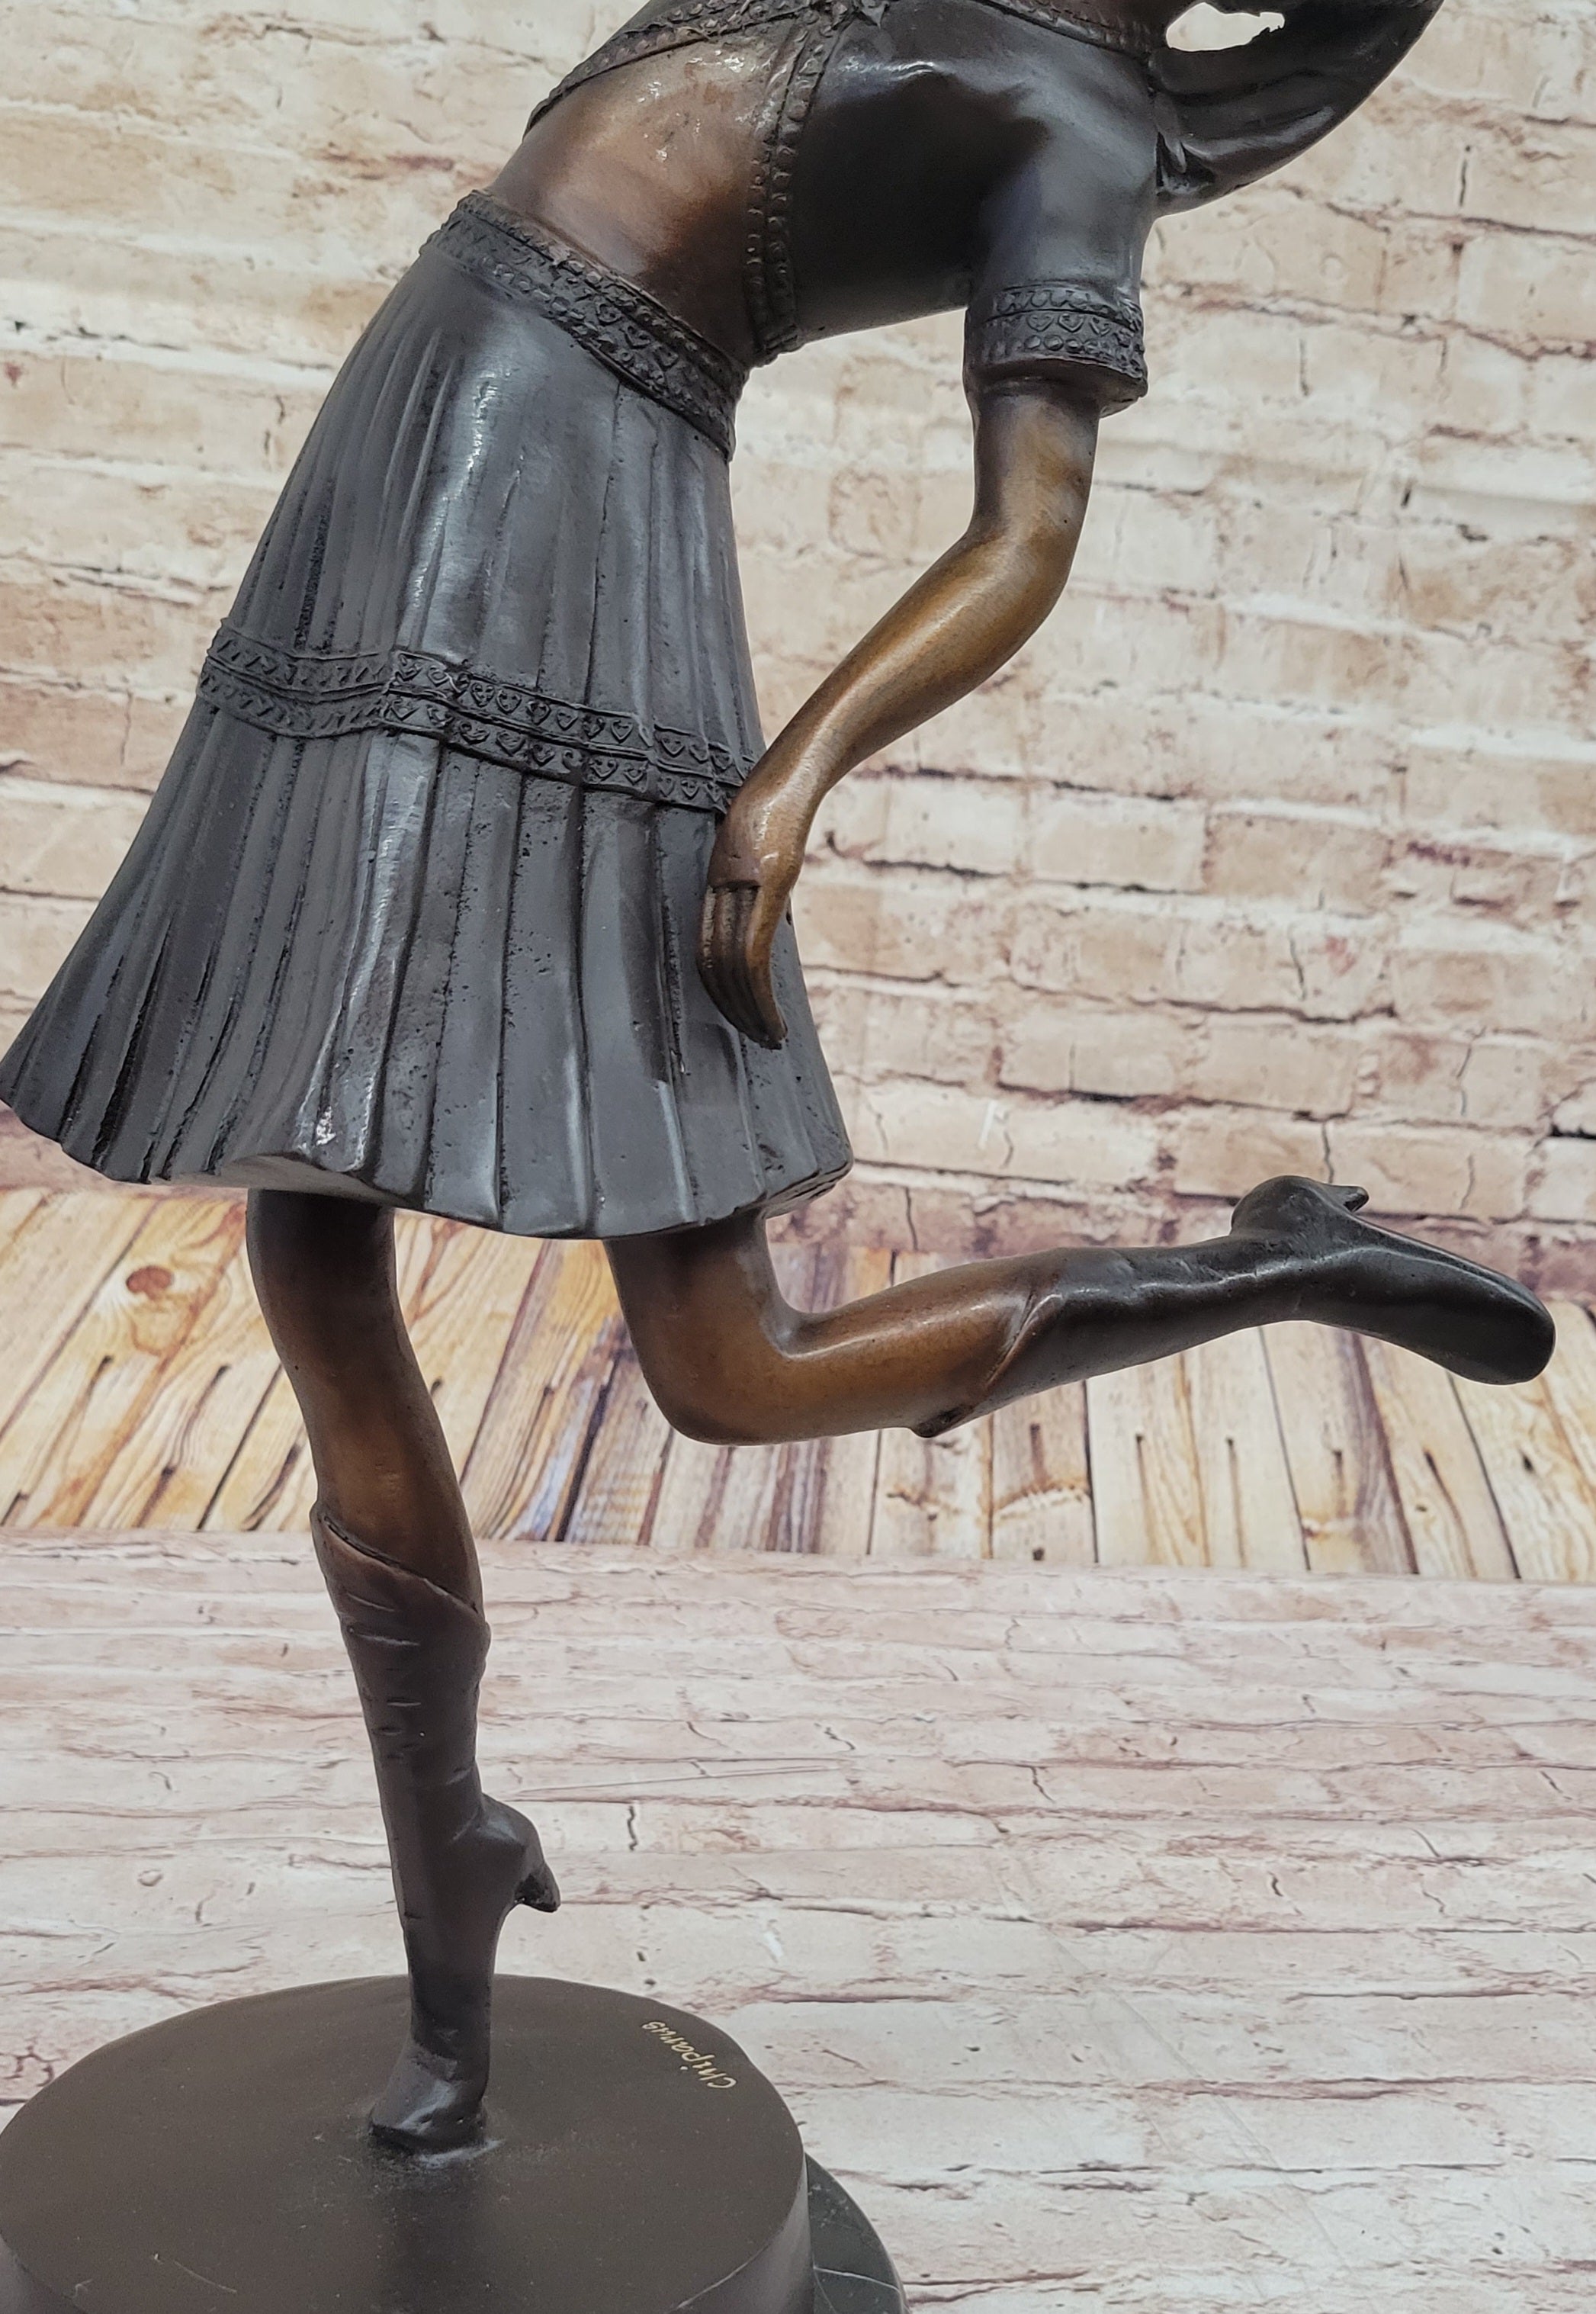 Young Lady Dancer Handcrafted Marble Bronze Sculpture Statue Figurine Gift Art